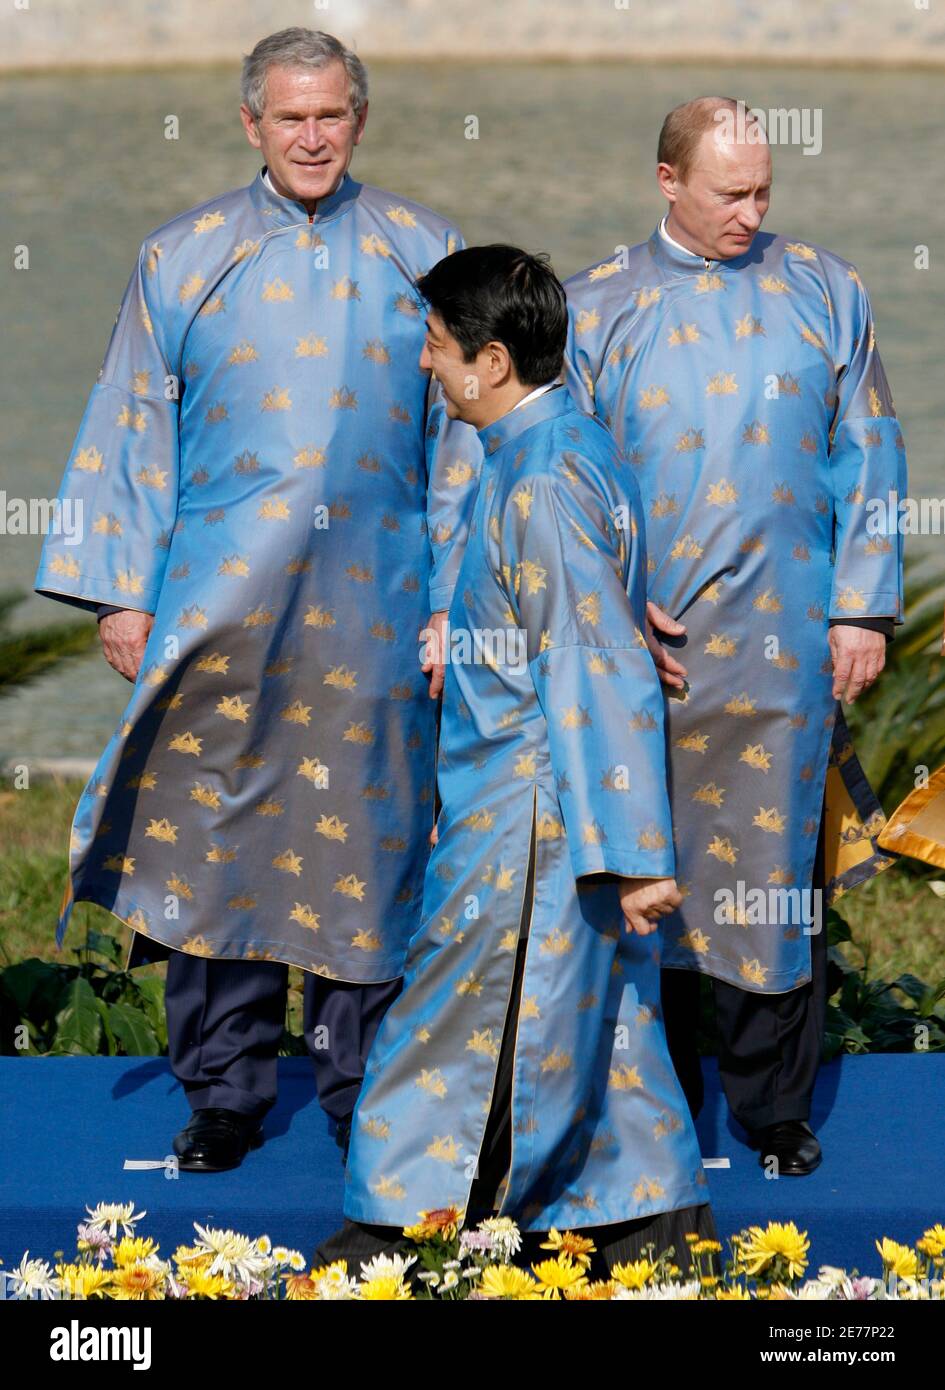 Japan's Prime Minister Shinzo Abe walks in front of U.S. President George W. Bush (L) and Russian President Vladimir Putin, wearing traditional Vietnamese clothes, known as the "ao dai", during the official photograph for the  the Asia-Pacific Economic Cooperation (APEC) Summit in Hanoi, November 19, 2006.  REUTERS/Jim Young   (VIETNAM) Foto de stock